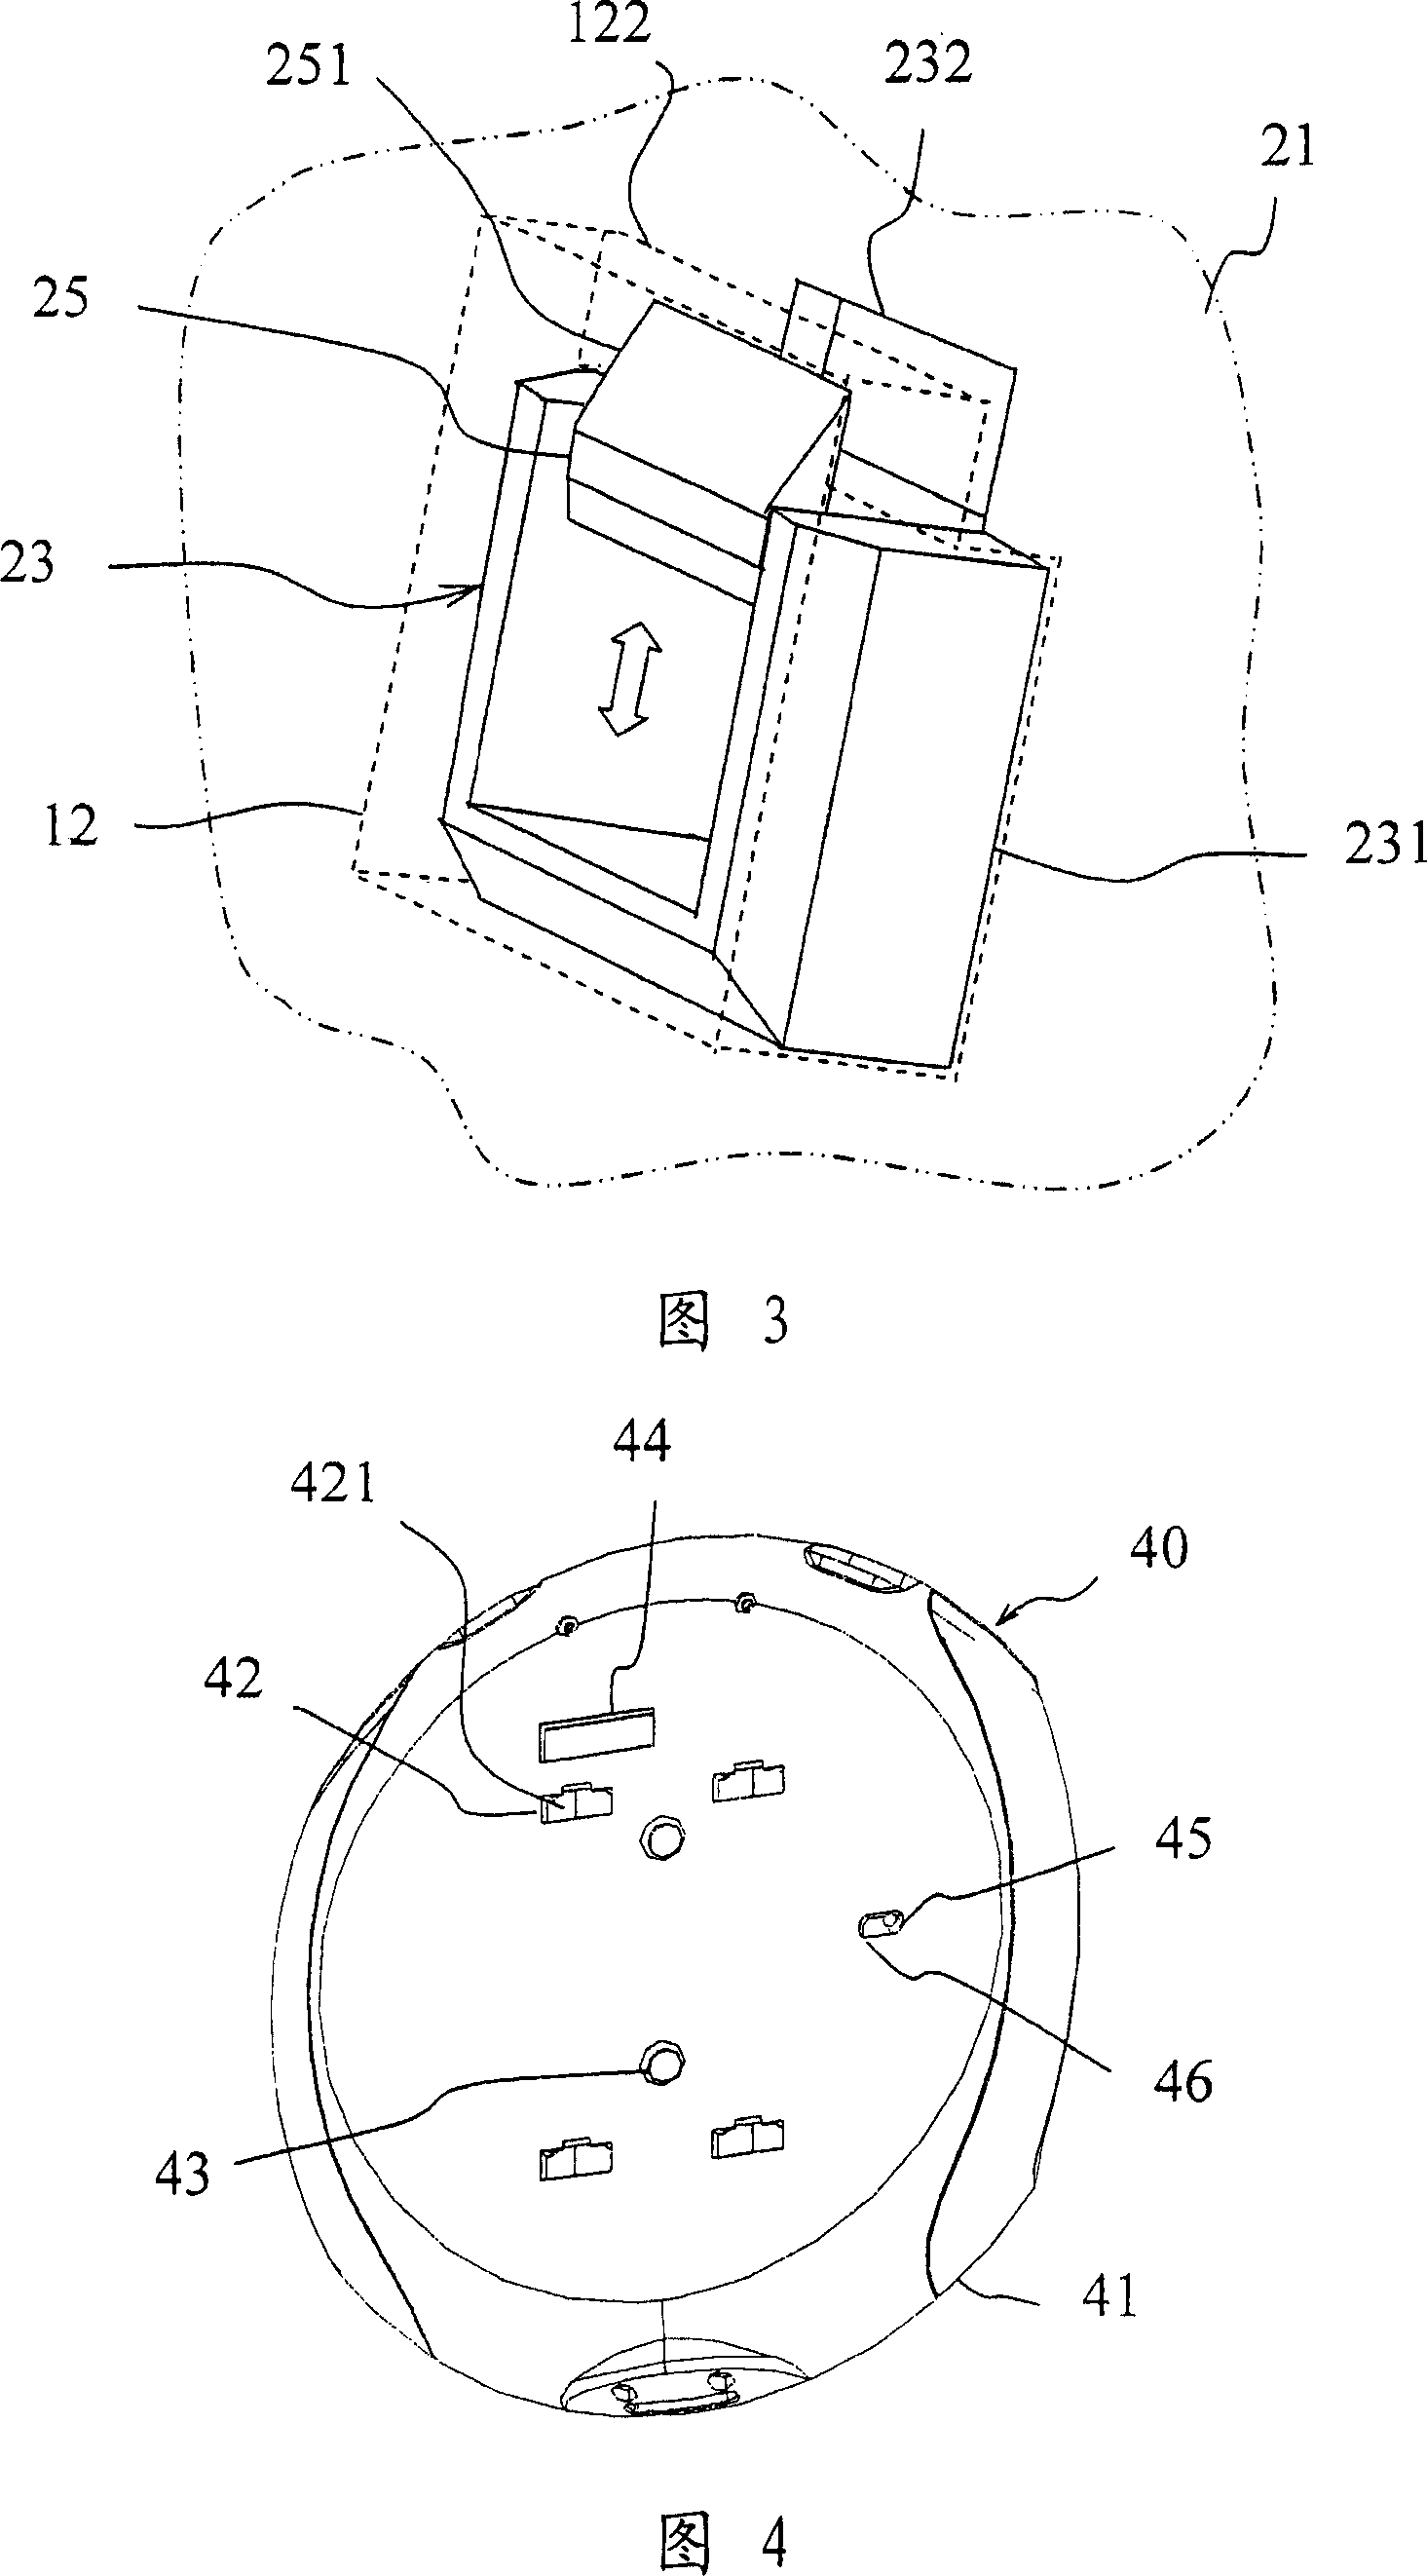 Separation and reunion structure for fittings